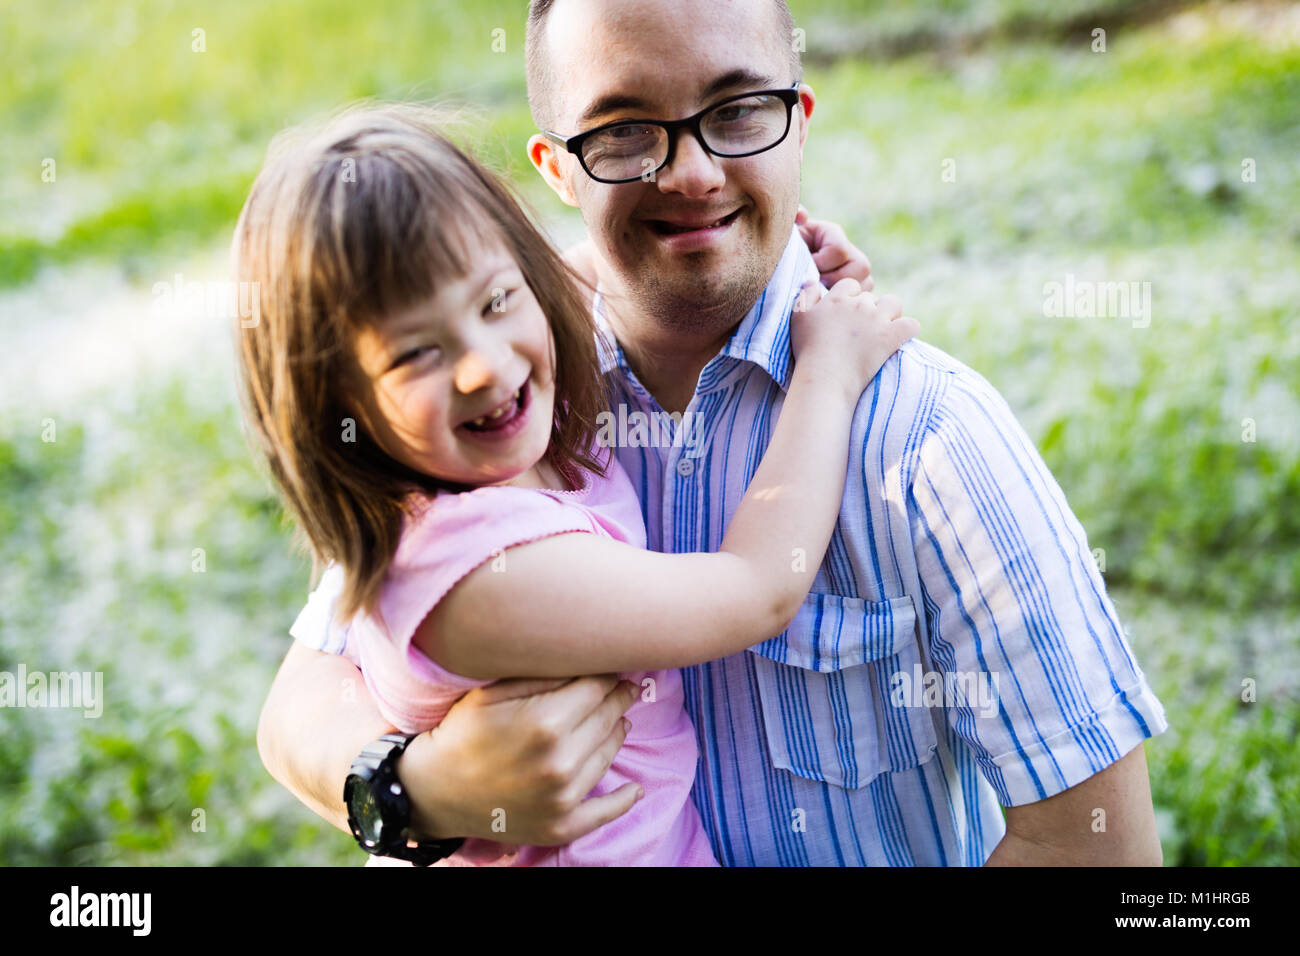 Picture of girl and man with down syndrome Stock Photo